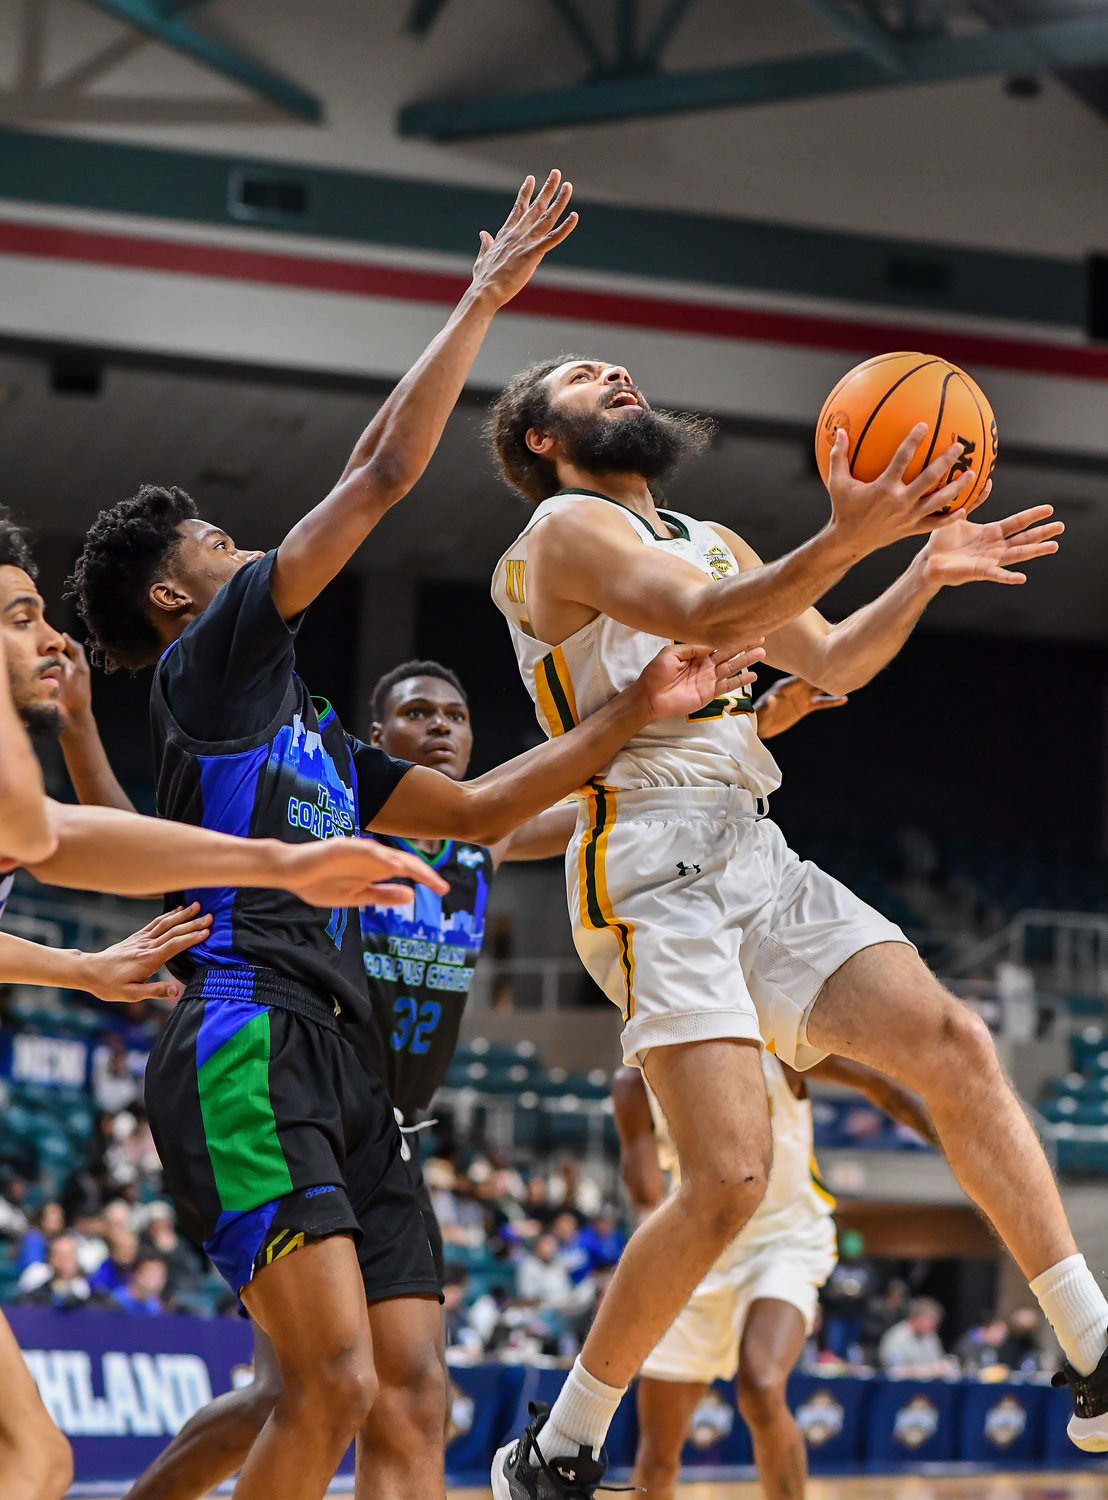 March 12,, 2022:  Southeastern Louisianas Joe Kasperzyk #25 drives up to the basket during the Southland Conference Basketball Championship game between A&M Corpus Christi vs Southeastern Louisiana. (Photo by Mark Goodman / Katy Times)